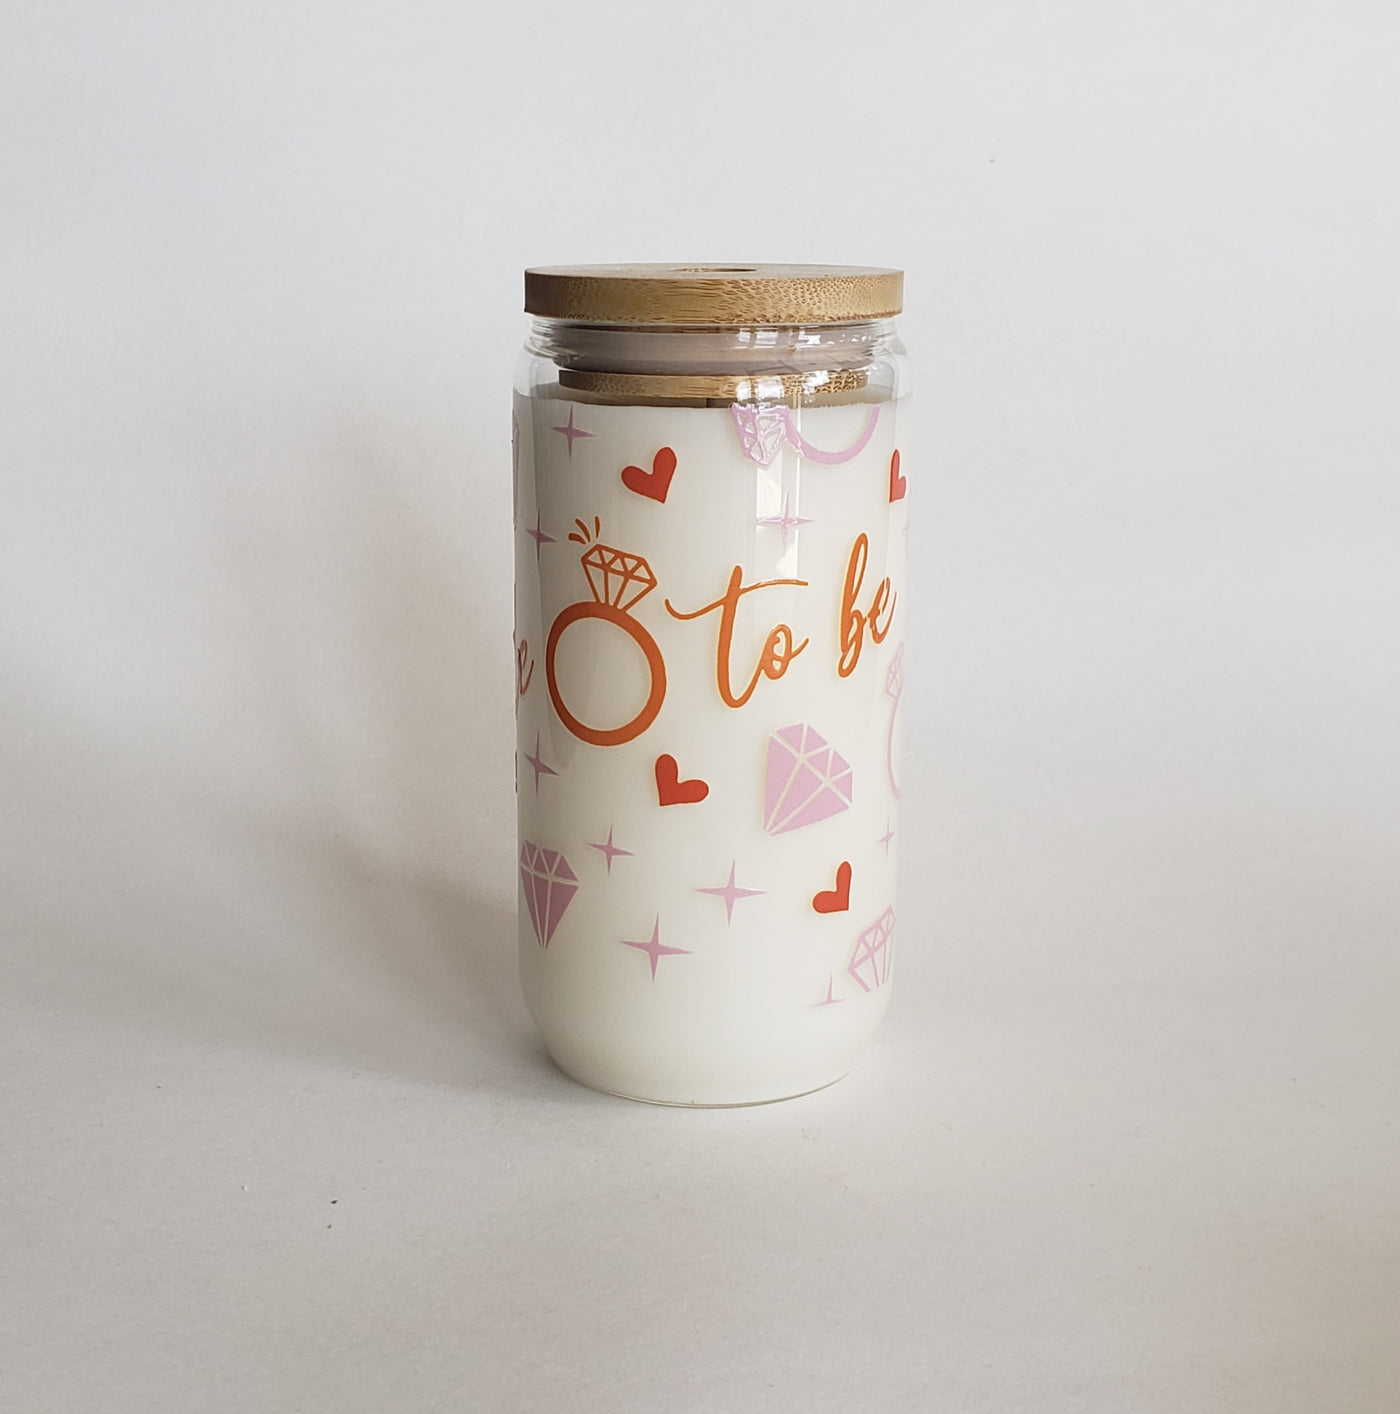 Bride to be Candle